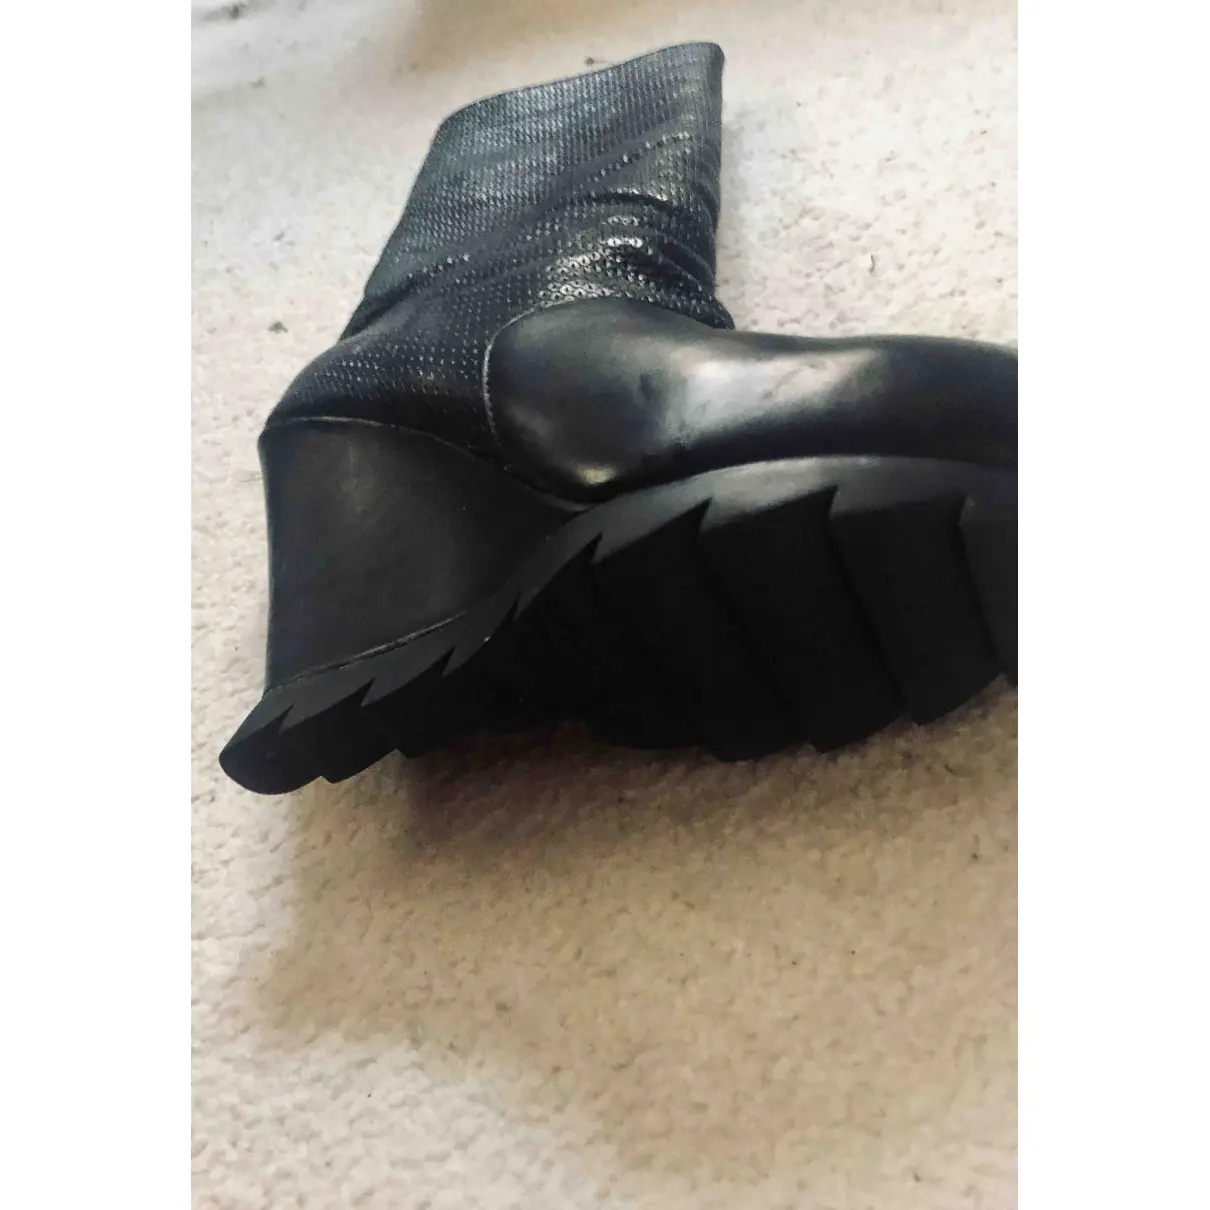 Camilla Skovgaard Leather boots for sale